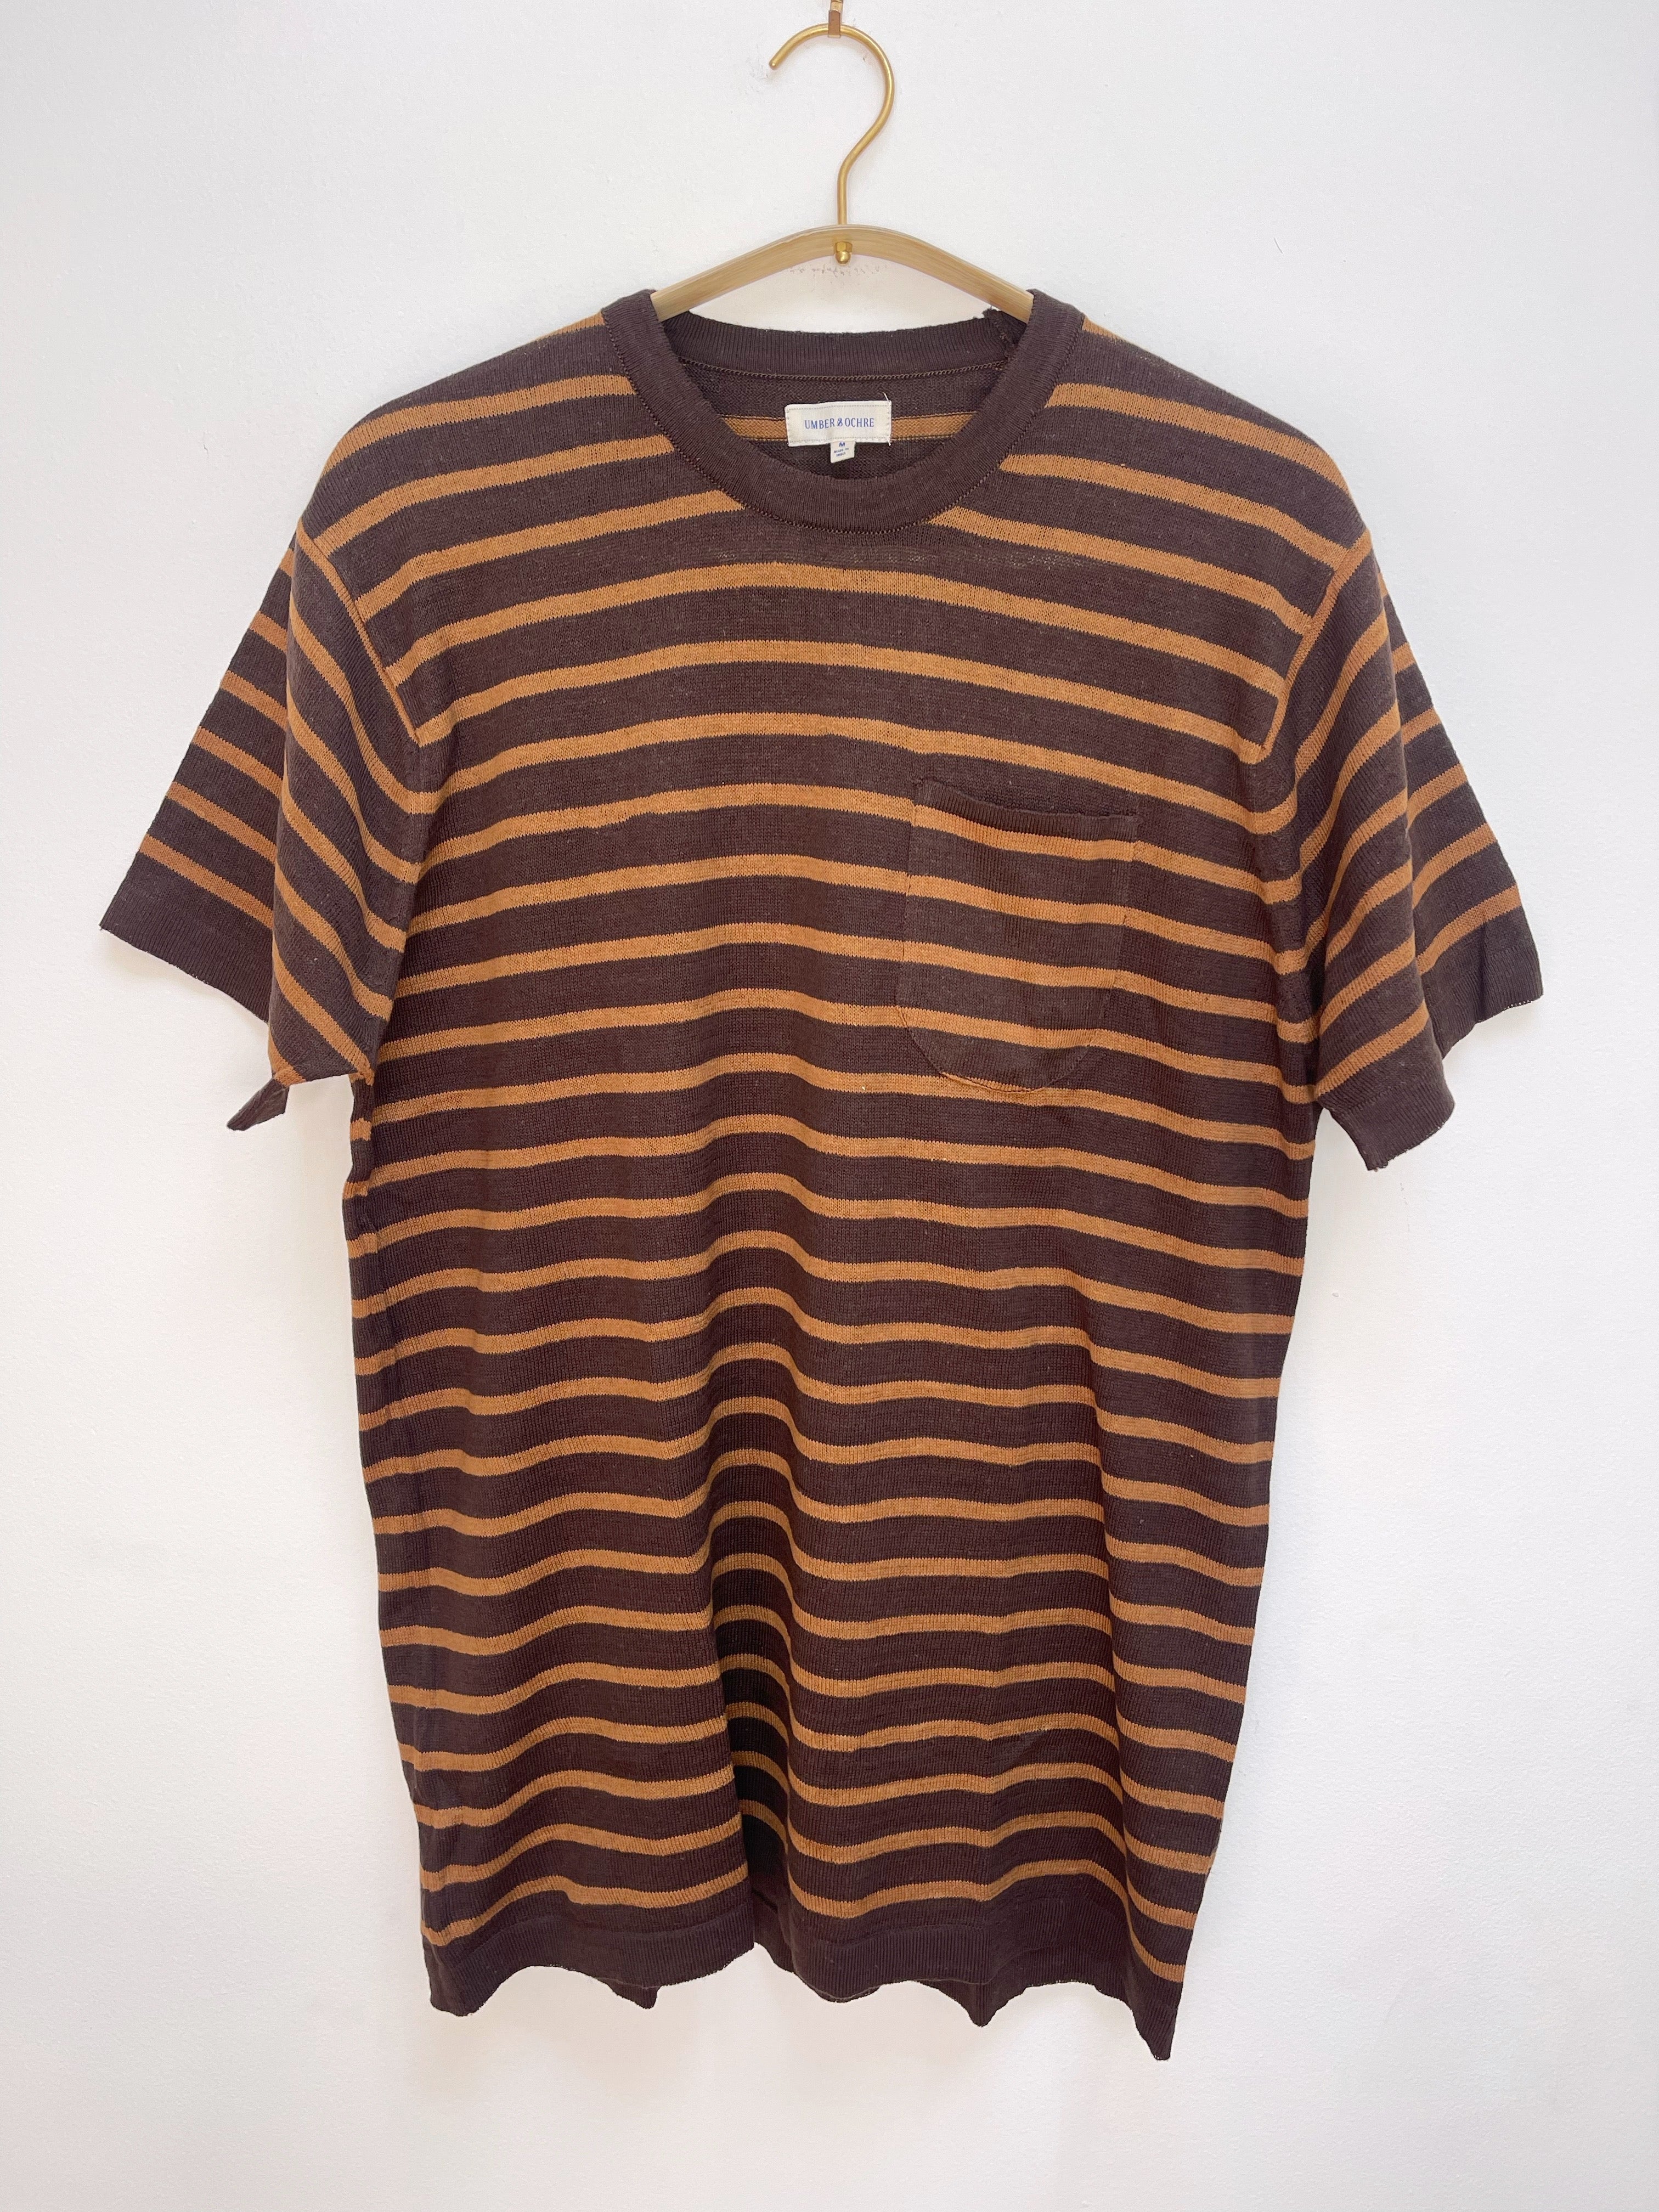 Azad S/S Pocket Flat Knitted Tee in Camel Stripe